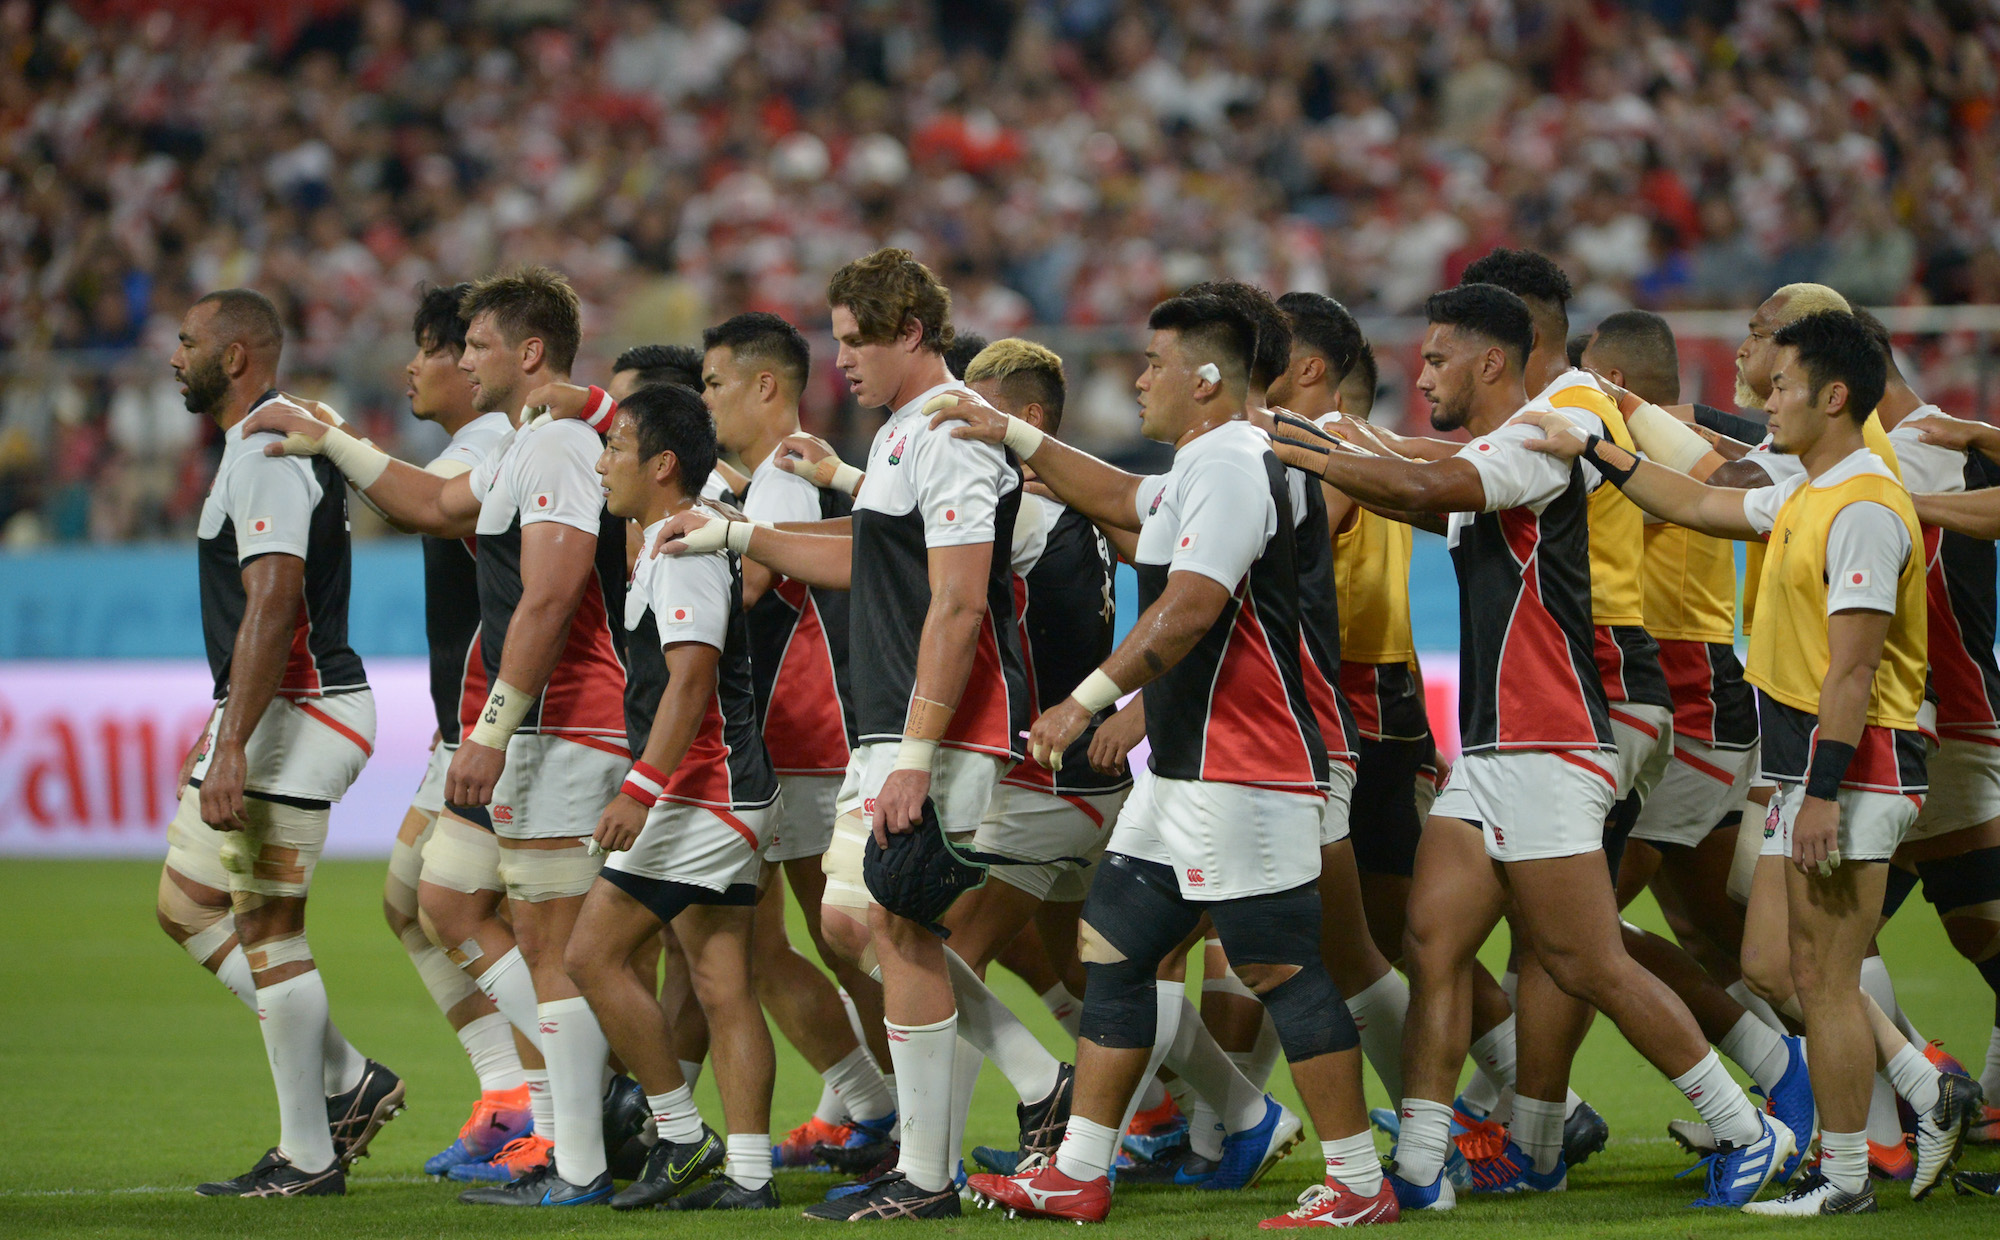 Captain Michael Leitch leads Japan's rugby team back to the locker room before the kickoff of the Japan-Samoa game on Oct. 5. | DAN ORLOWITZ